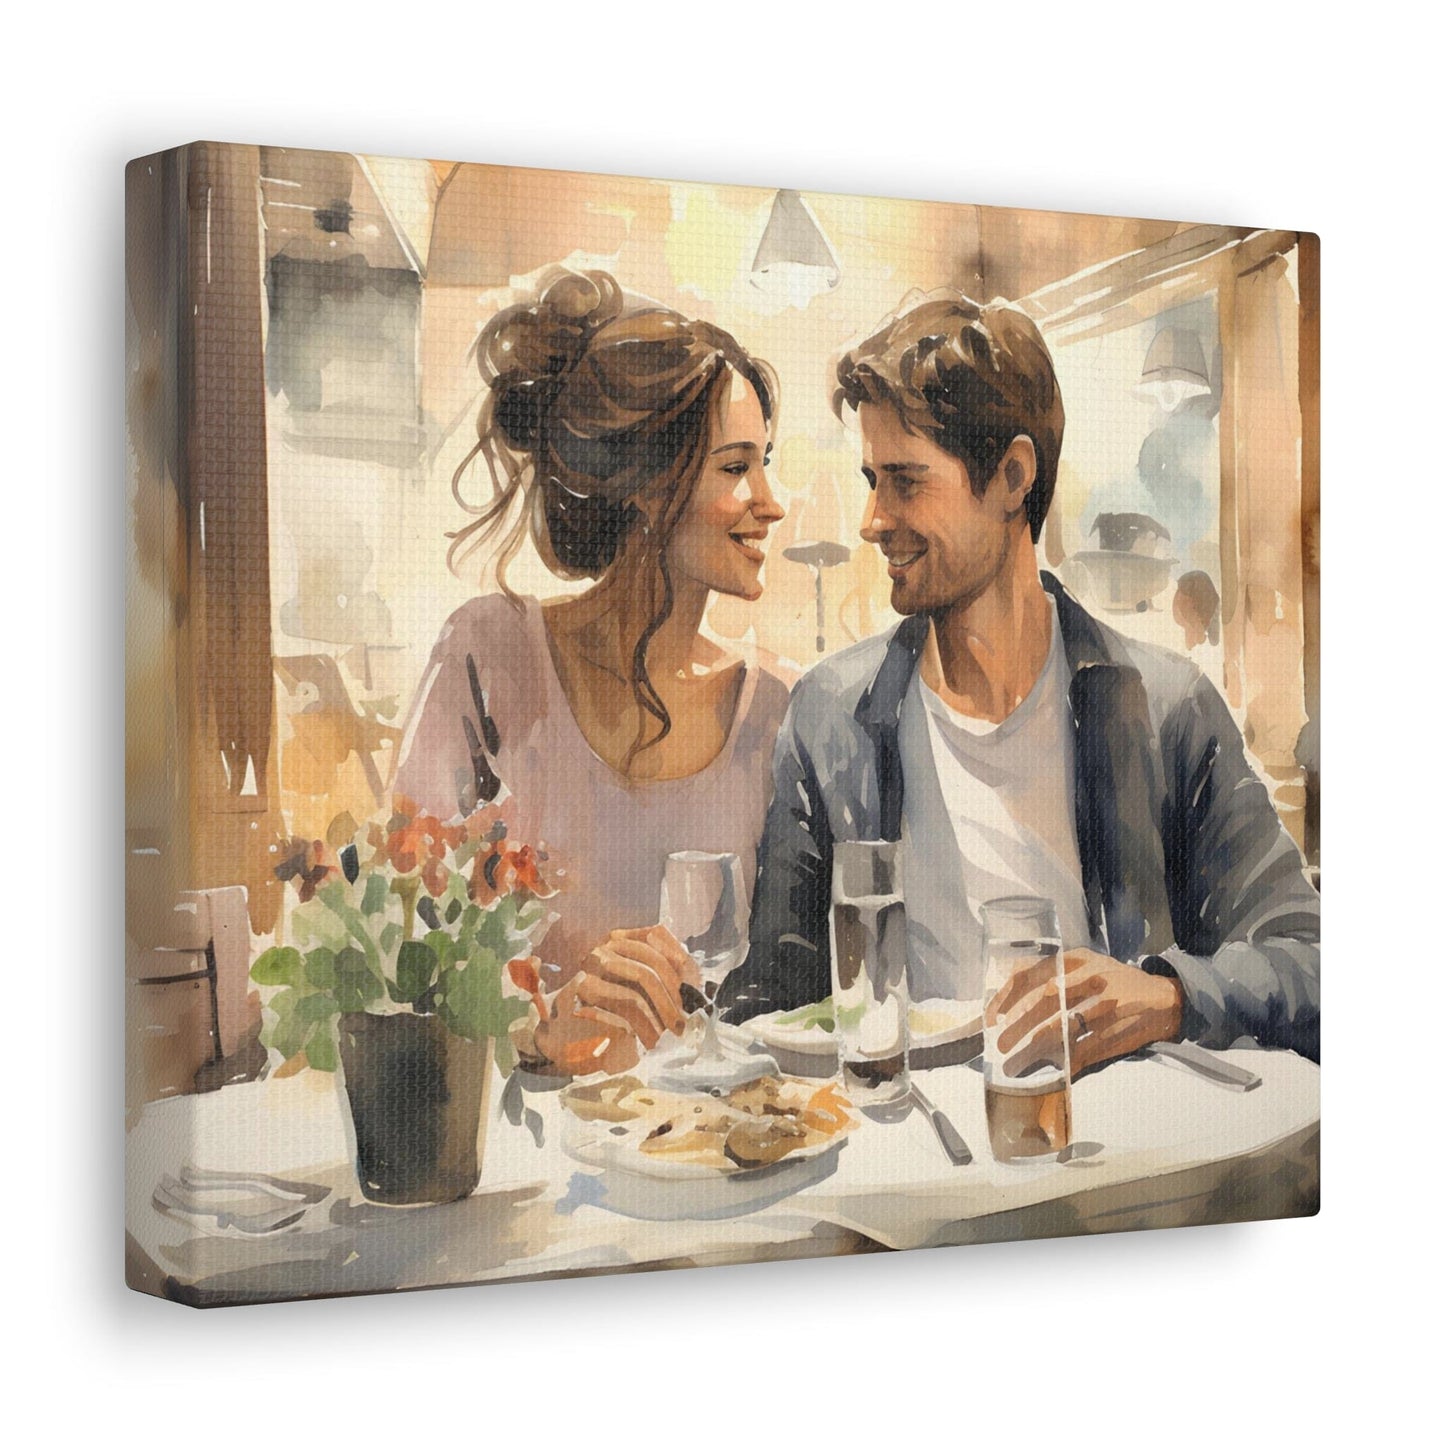 angle pic This captivating watercolor canvas showcases a young couple, deeply in love, sharing an intimate meal at a cozy restaurant. The soft, romantic hues highlight their comfort and contentment, creating a tender atmosphere. It's a heartfelt portrayal of romance.